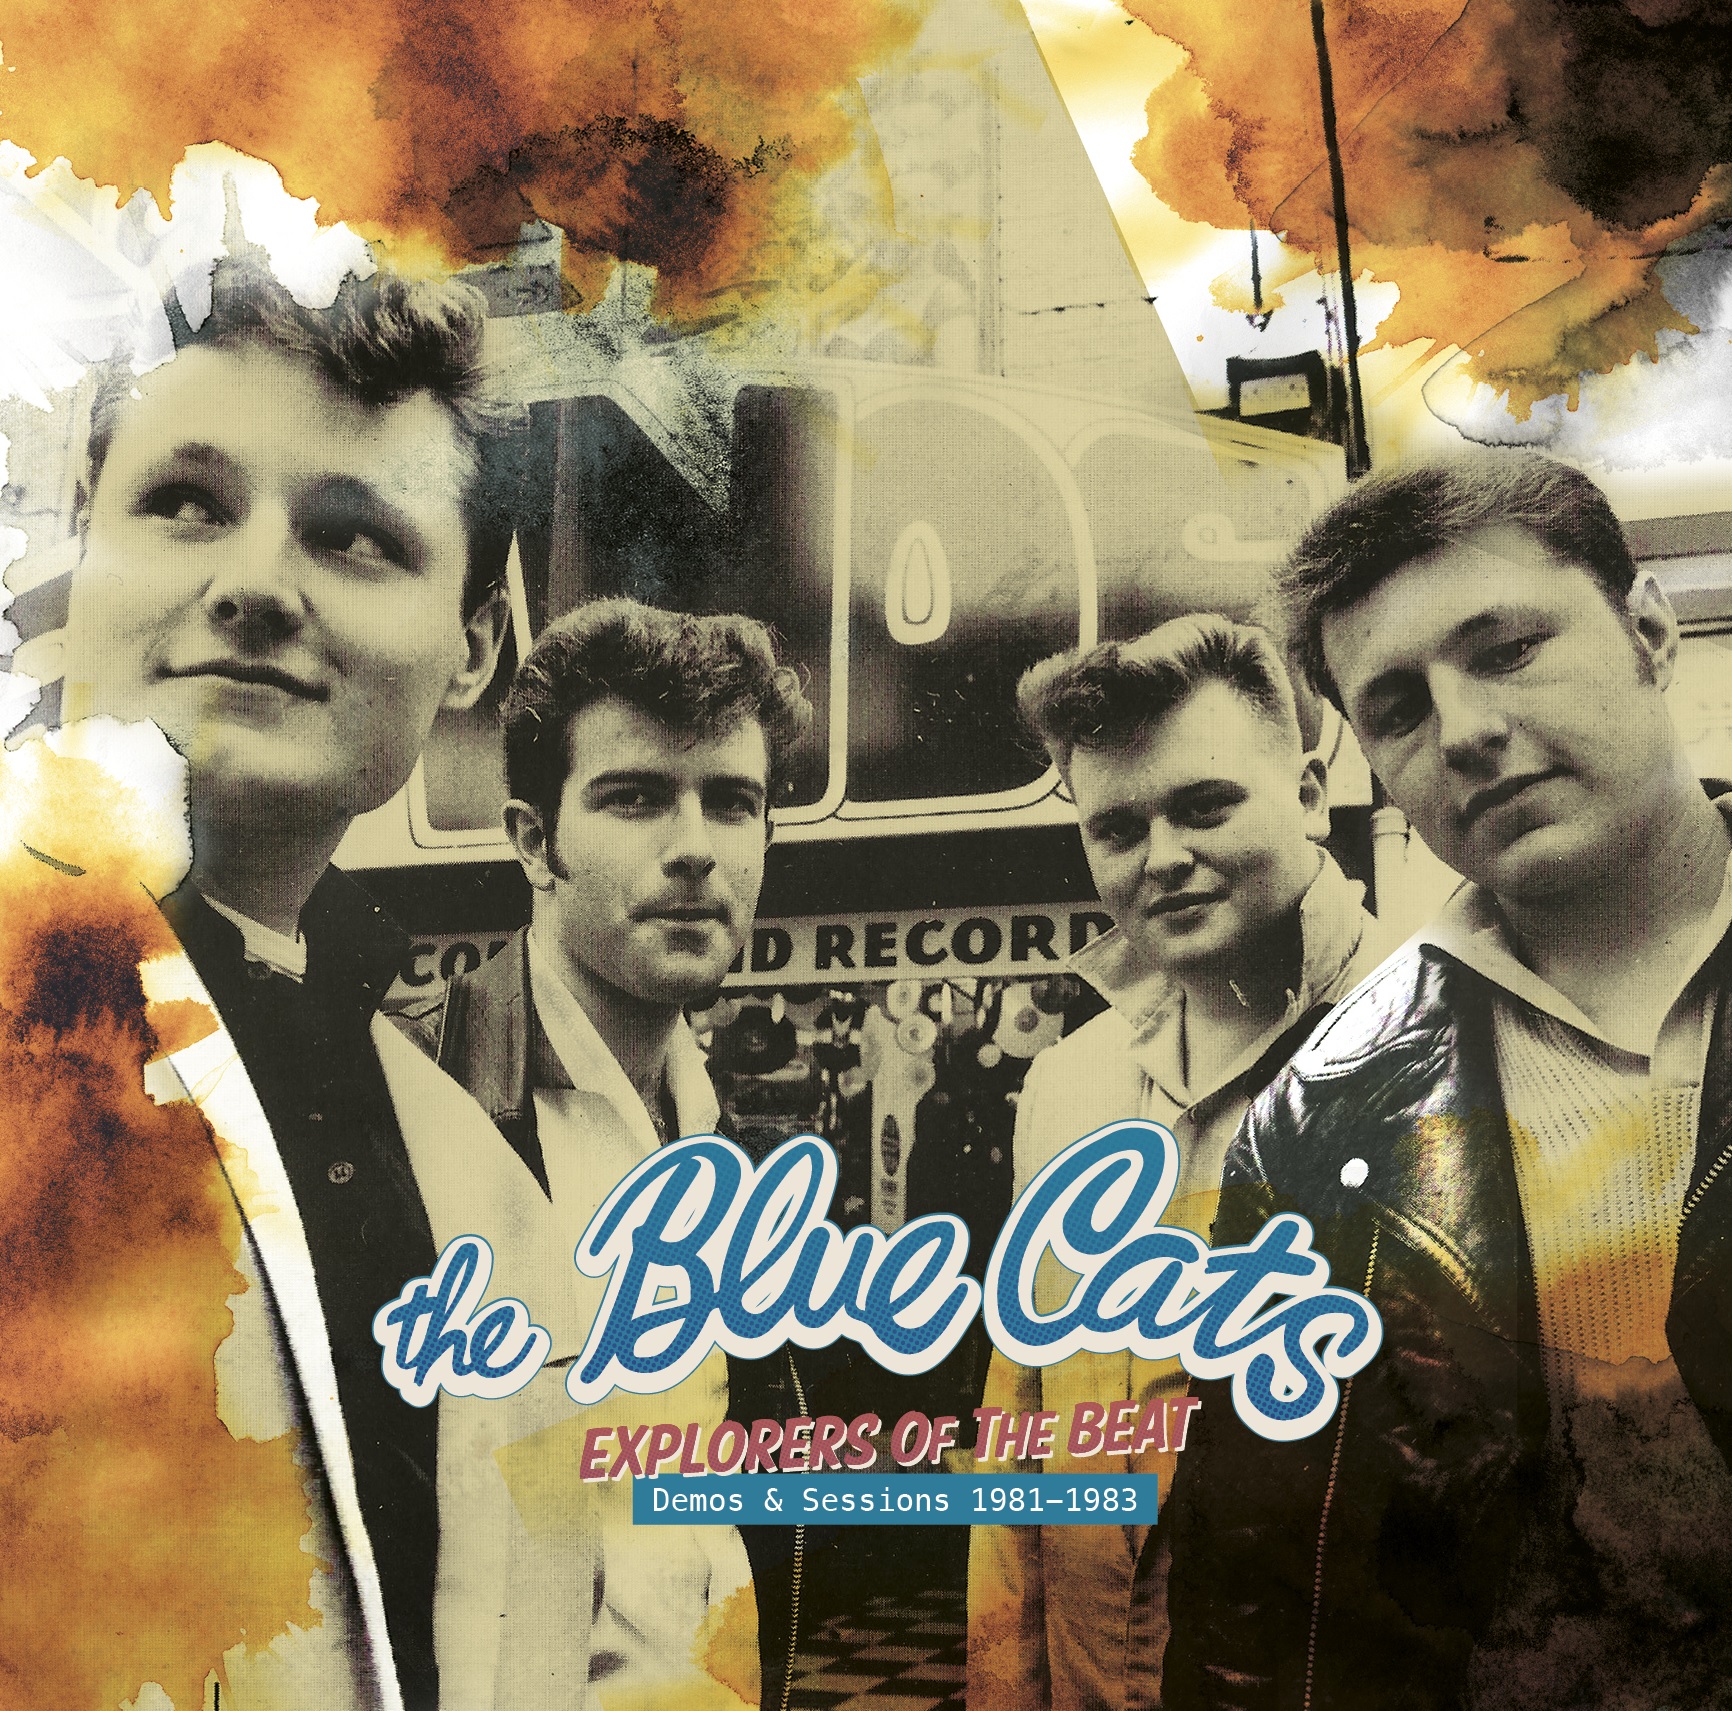 The Blue Cats - Explorers of the Beat (Demos & Sess